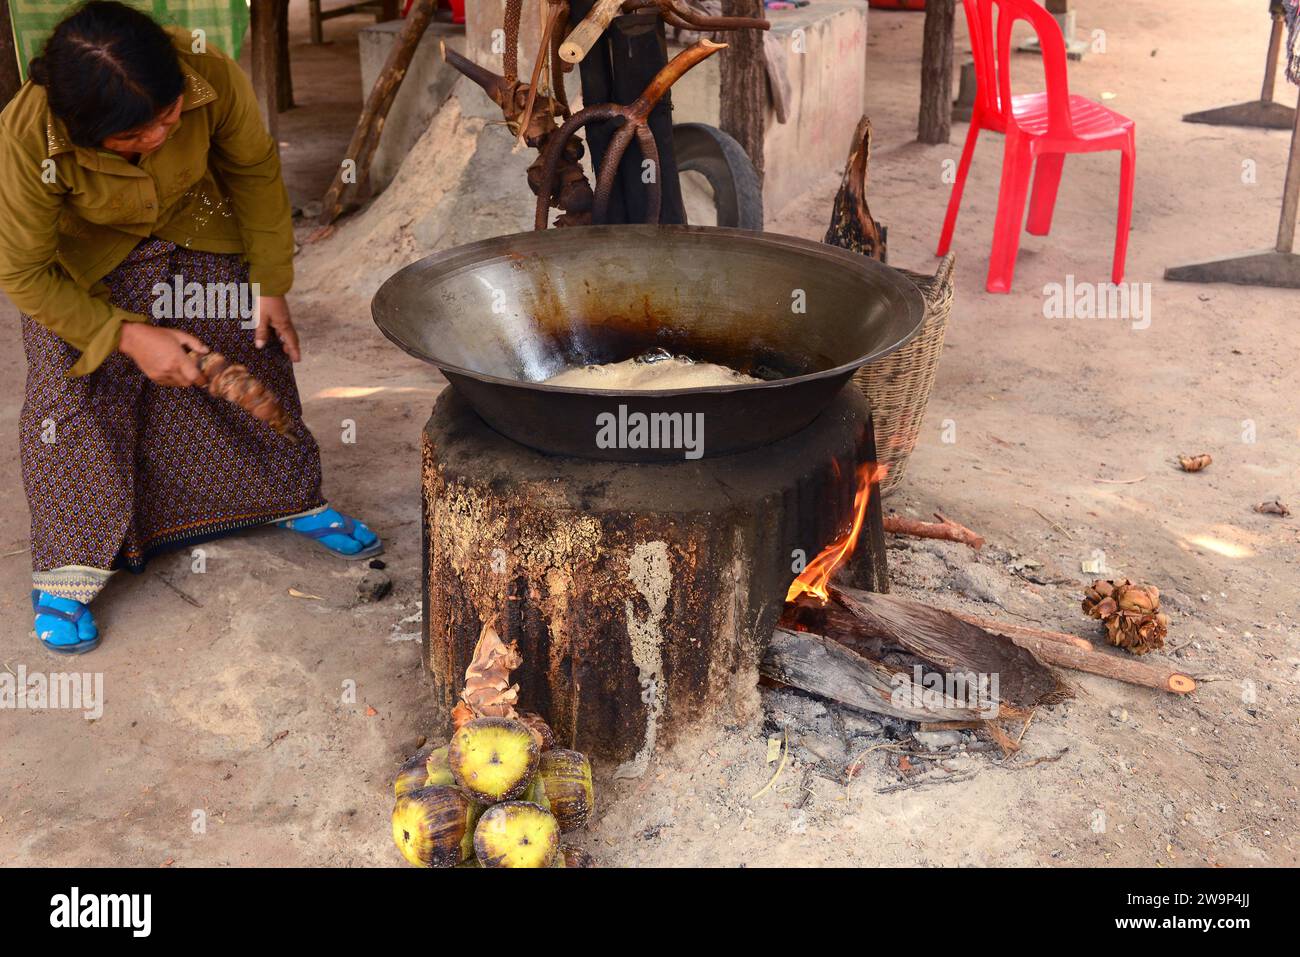 Making palm sugar in a traditional oven. Siem Reap, Cambodia. Stock Photo